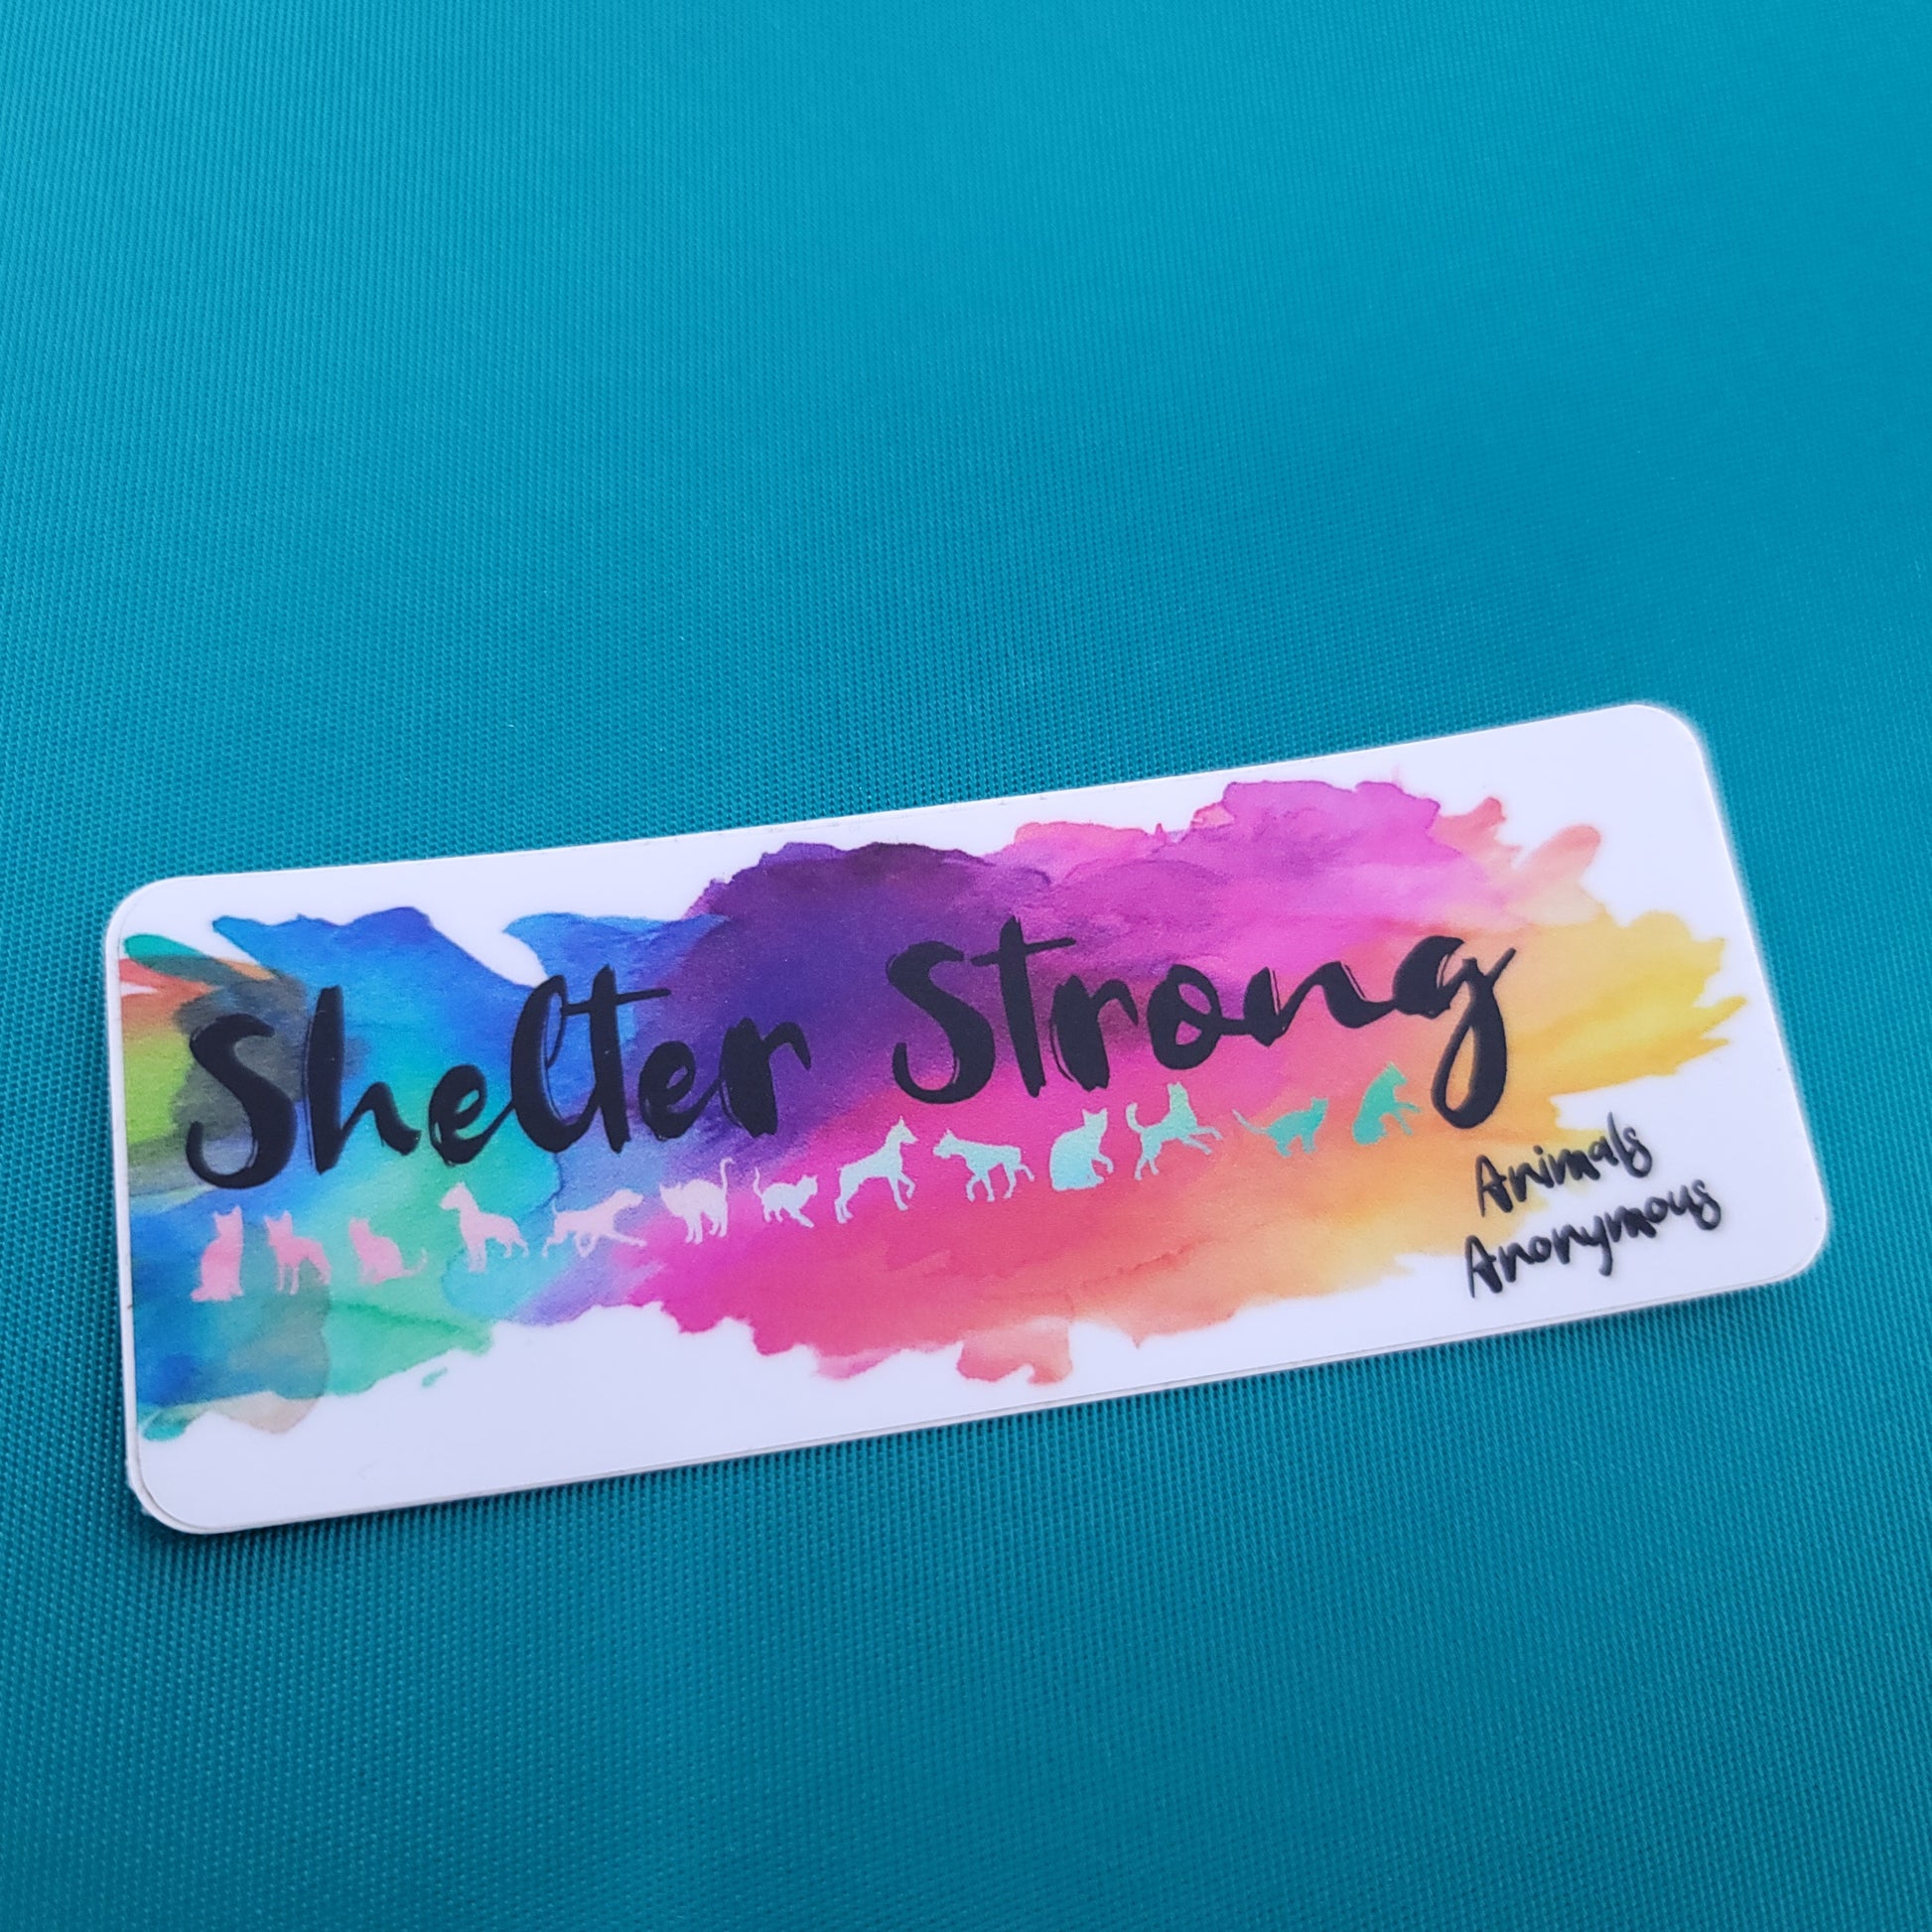 Shelter Strong (Cats and Dogs) - Sticker - Animals Anonymous Apparel